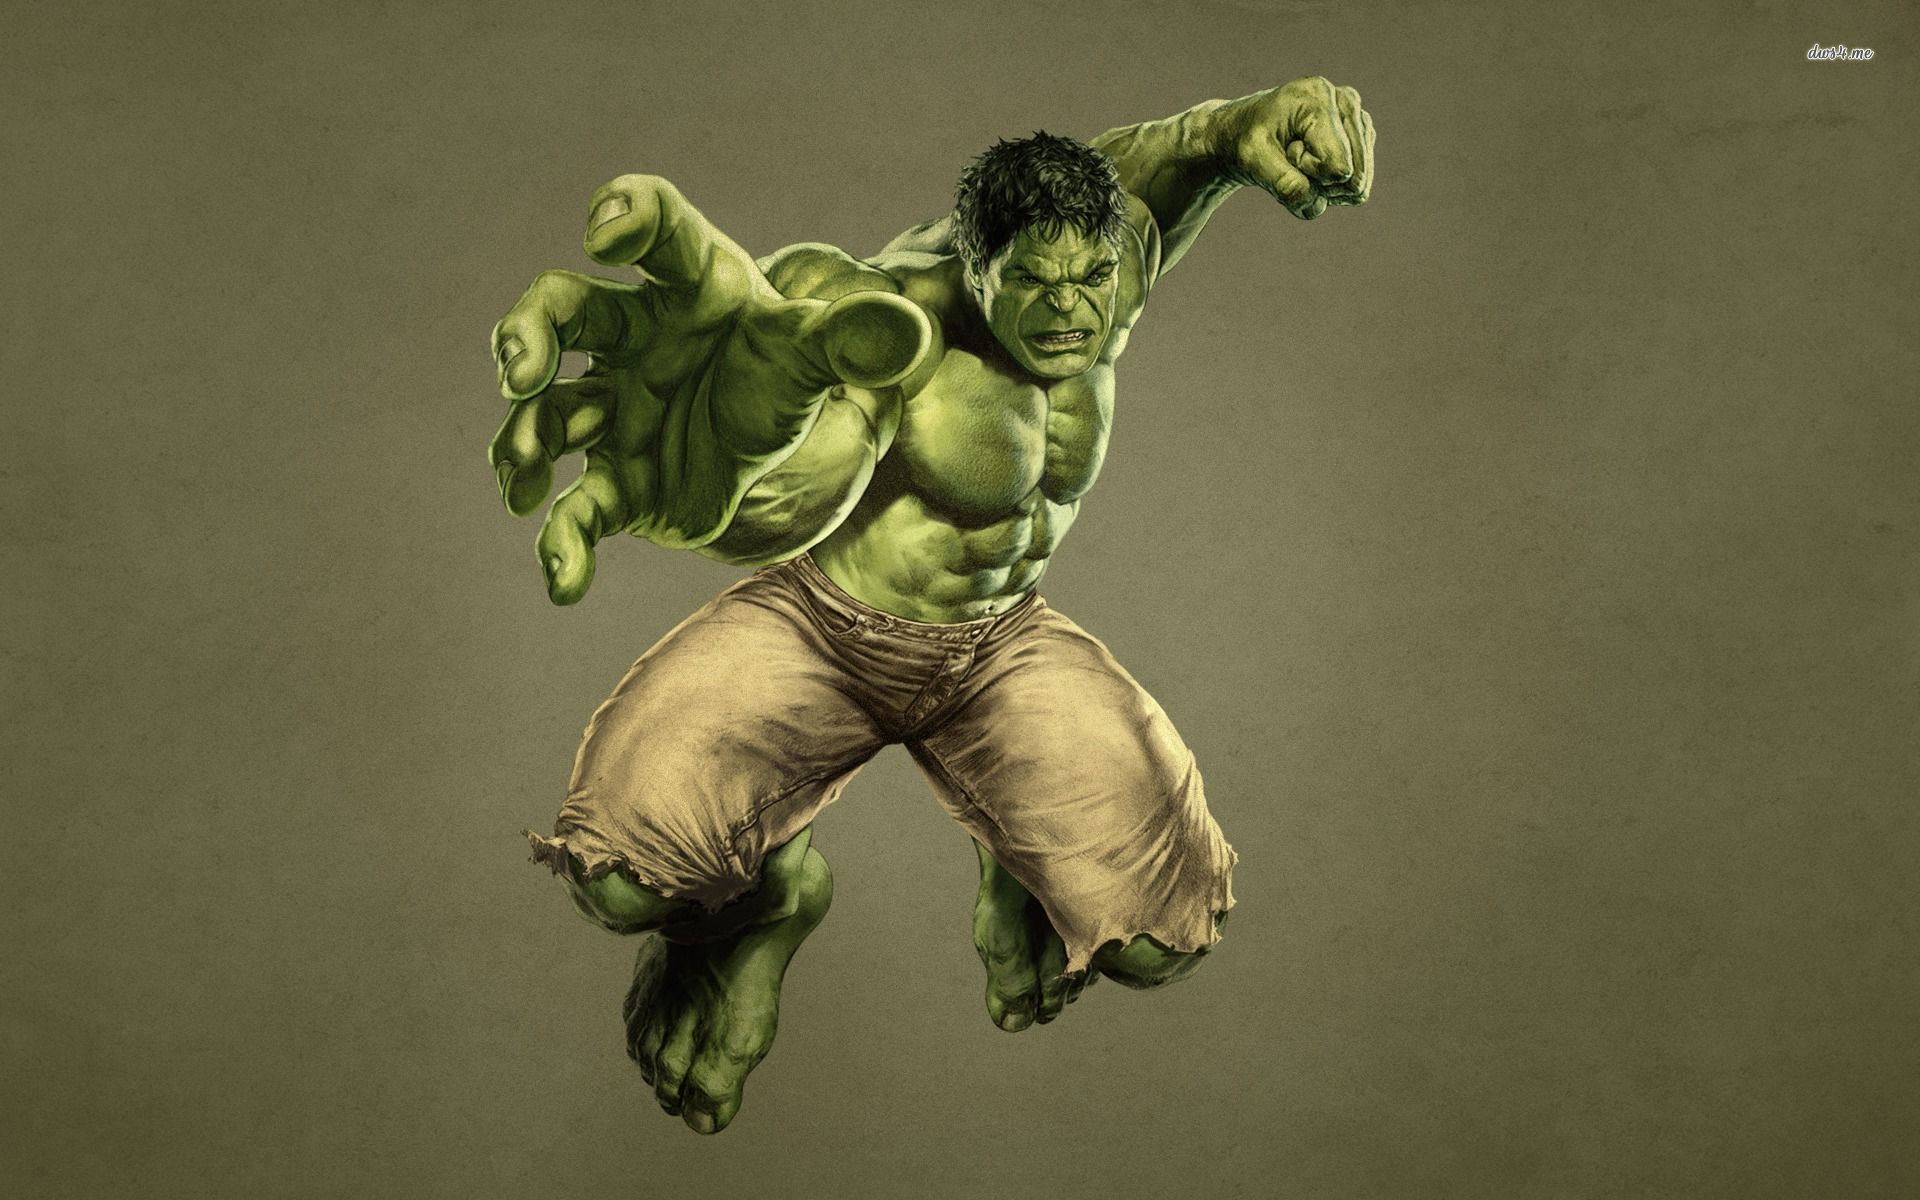 Incredible Hulk Wallpapers Archives - Page 13 of 13 ...